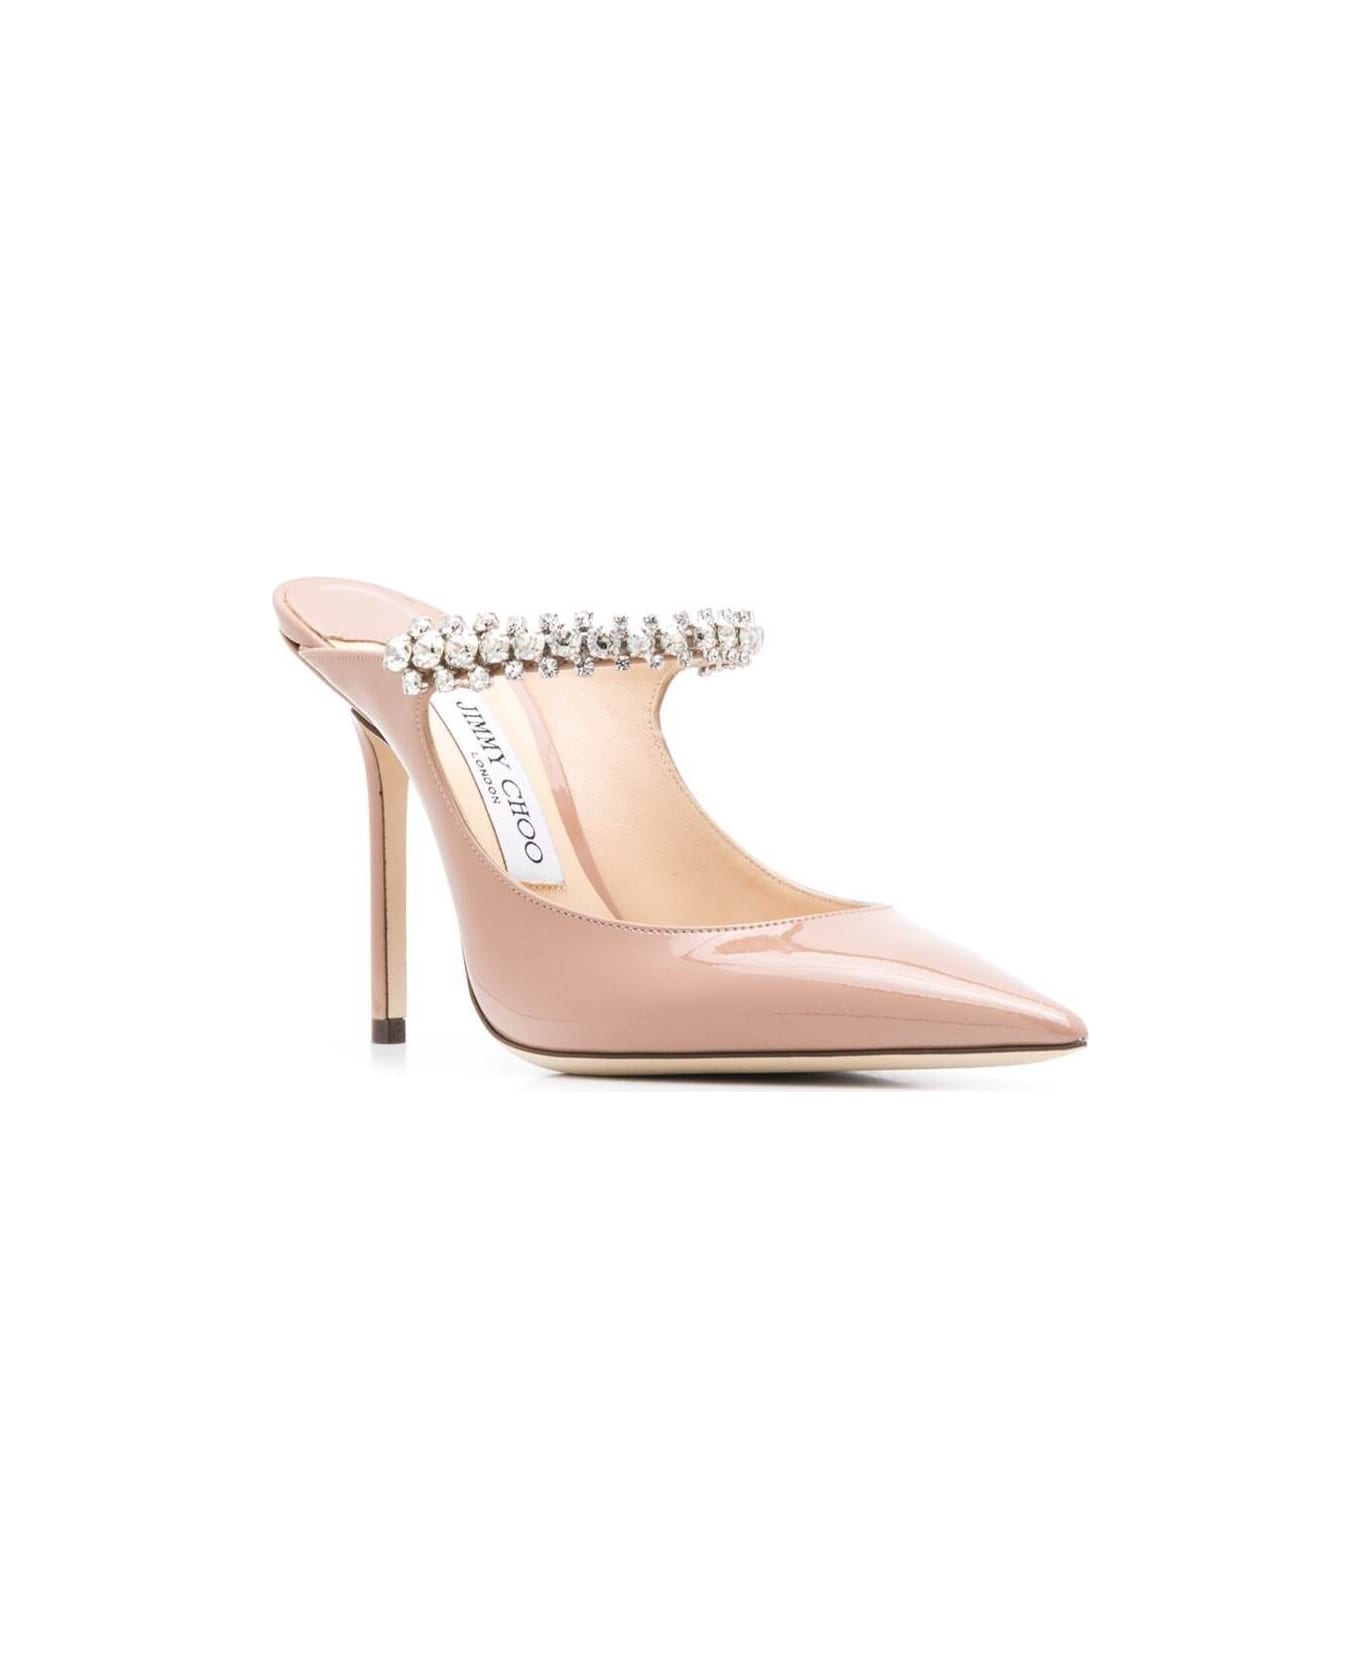 Jimmy Choo Pink Patent Leather Pumps With Crystal Strap Woman - Pink